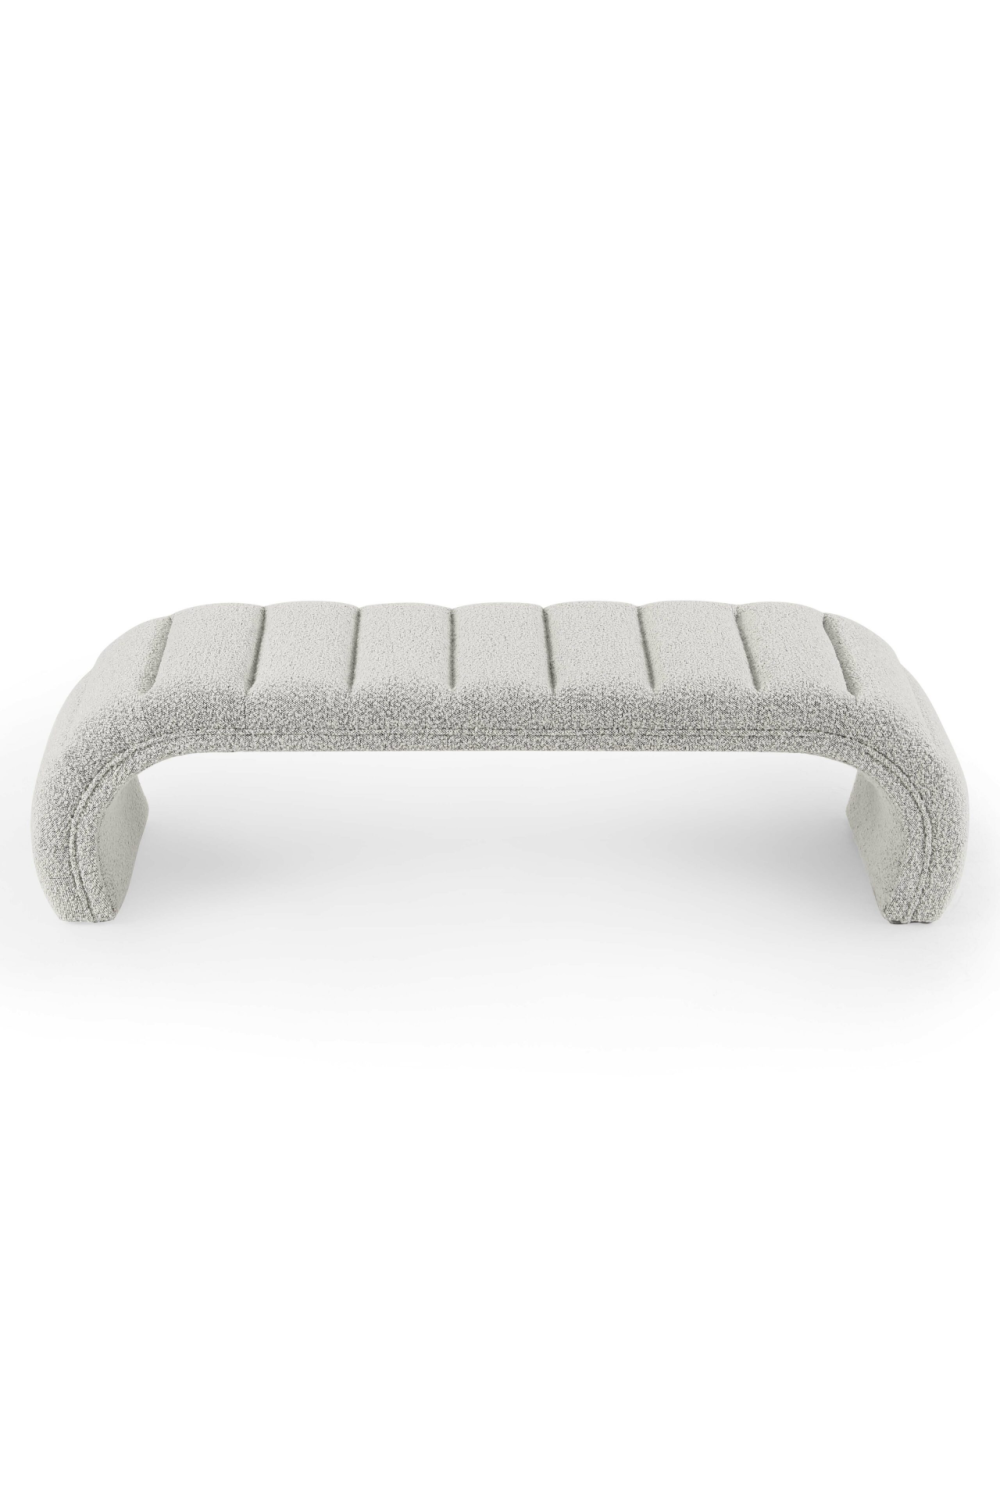 Modern Curved Bench | Liang & Eimil Coppola | Oroa.com